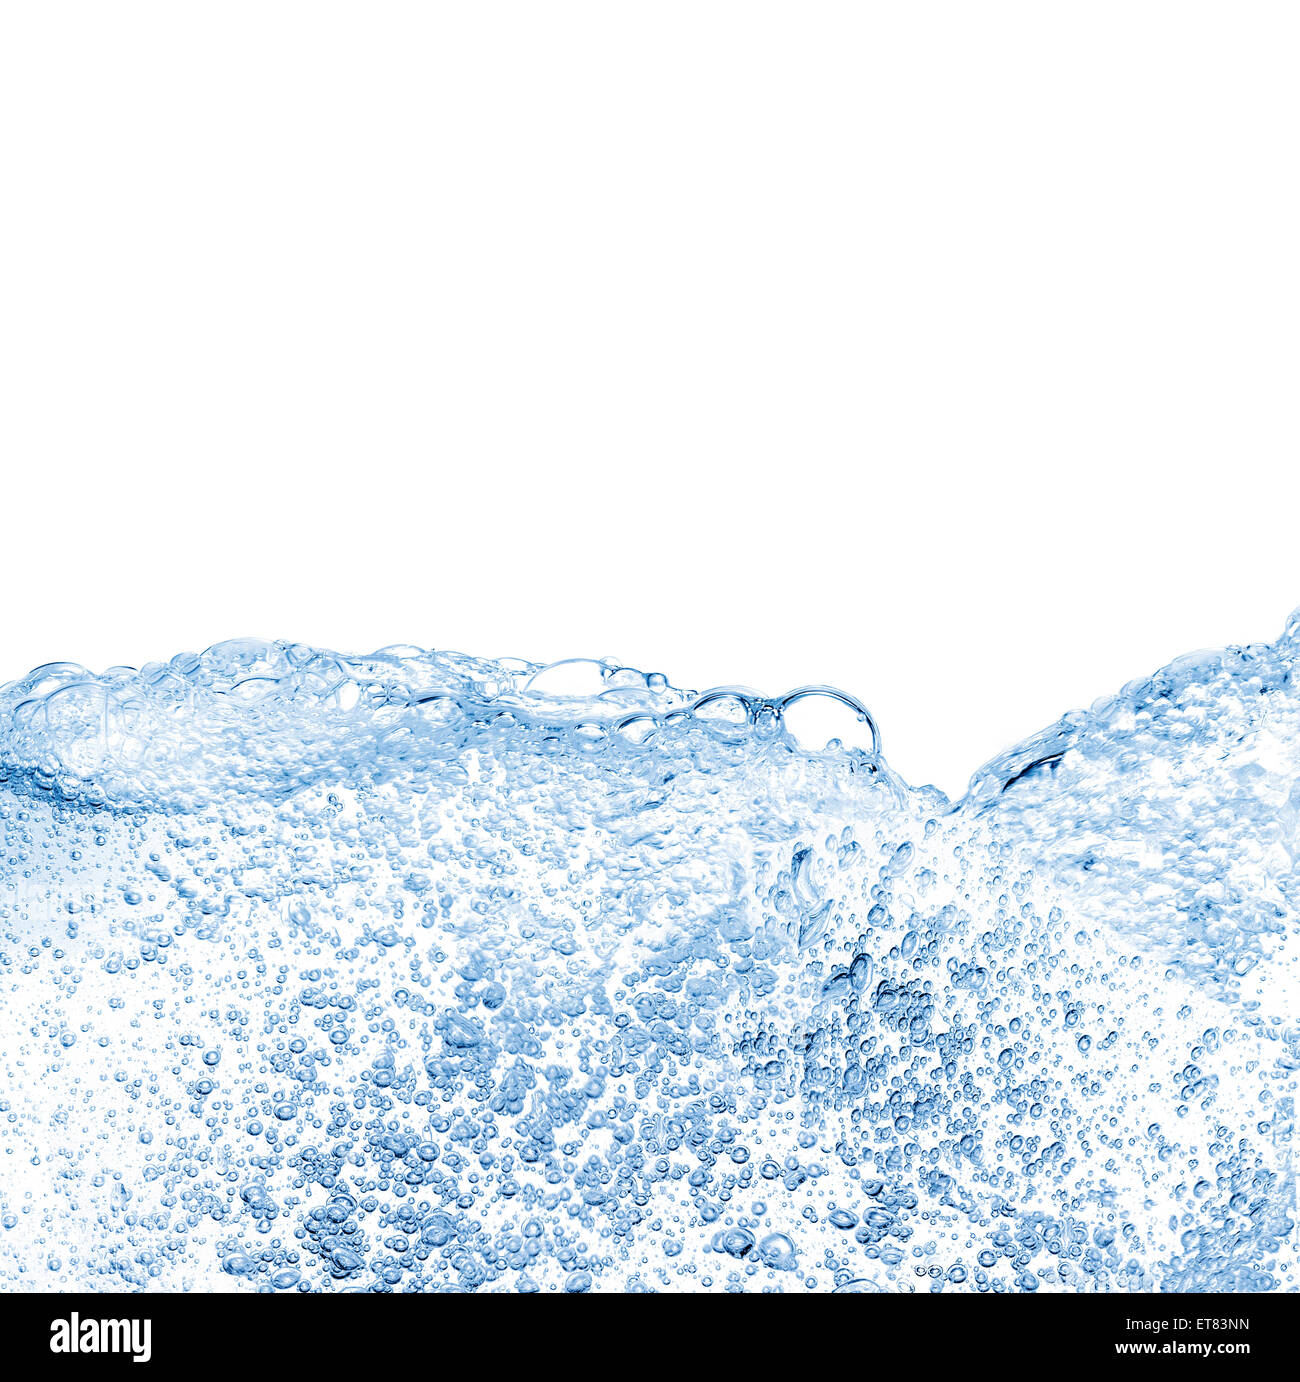 Water bubbles and turbulence against white background Stock Photo